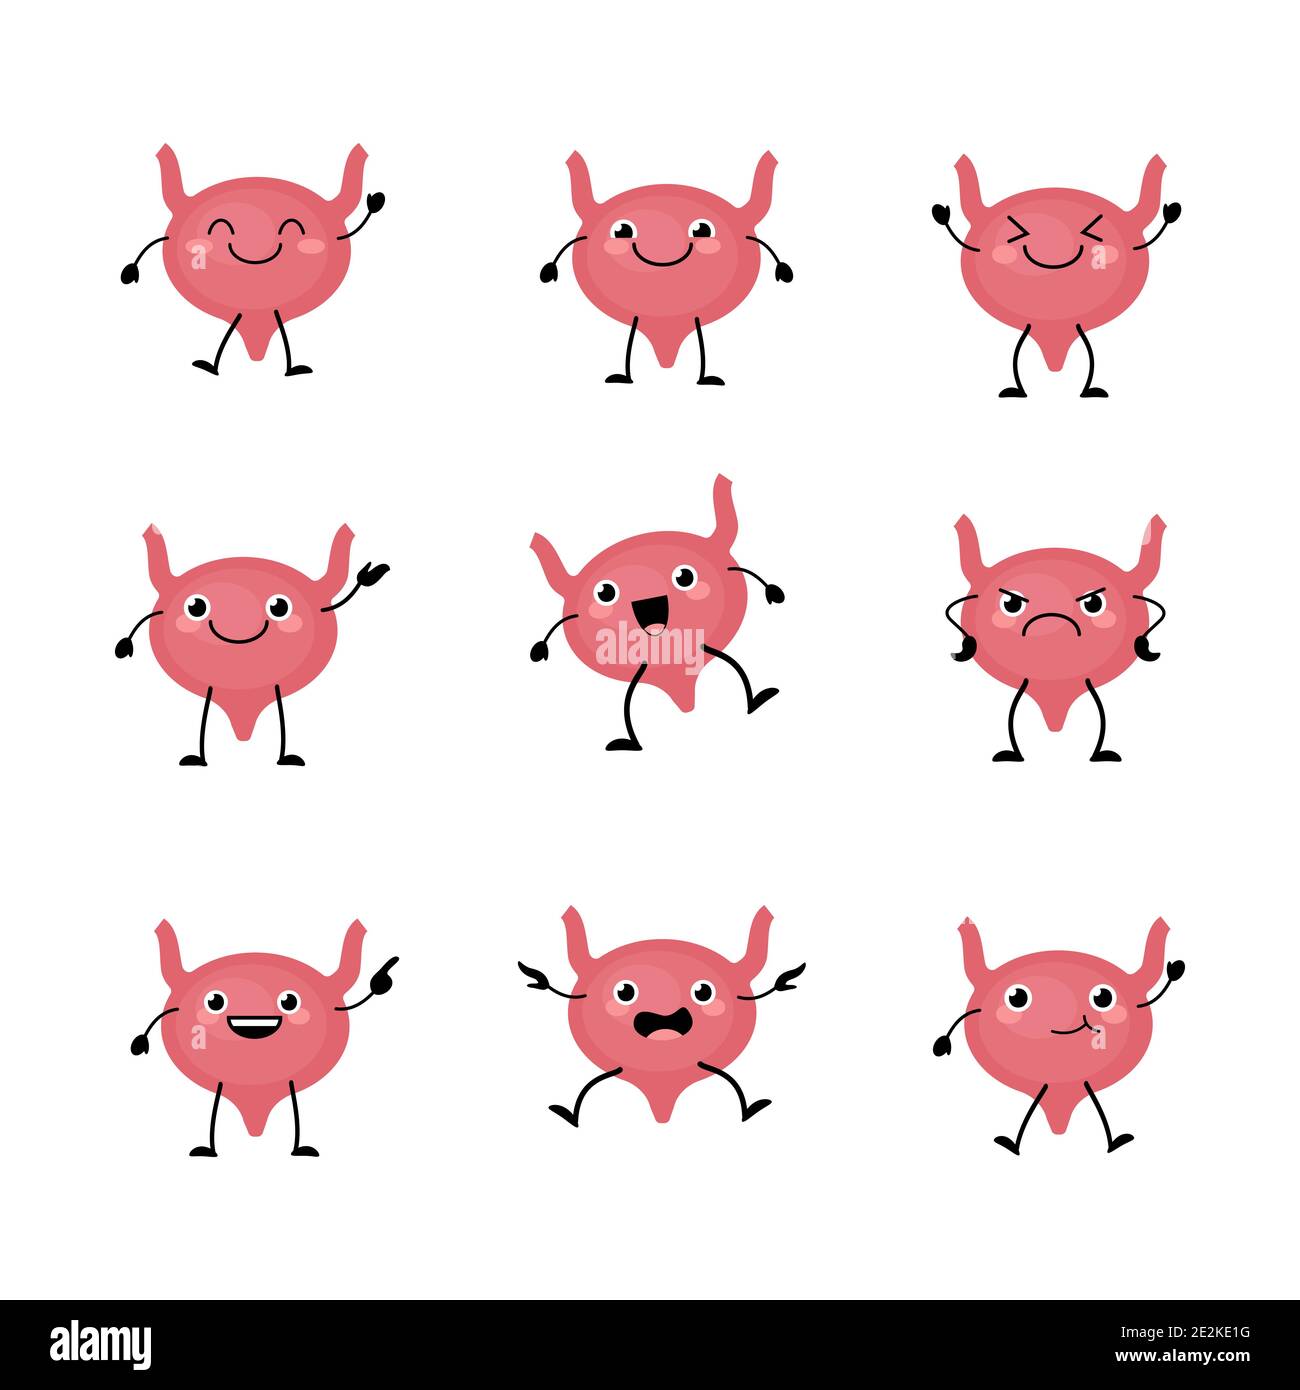 Cute bladder organs character set in a flat cartoon style. Human organs person with the different emotions. Stock Vector